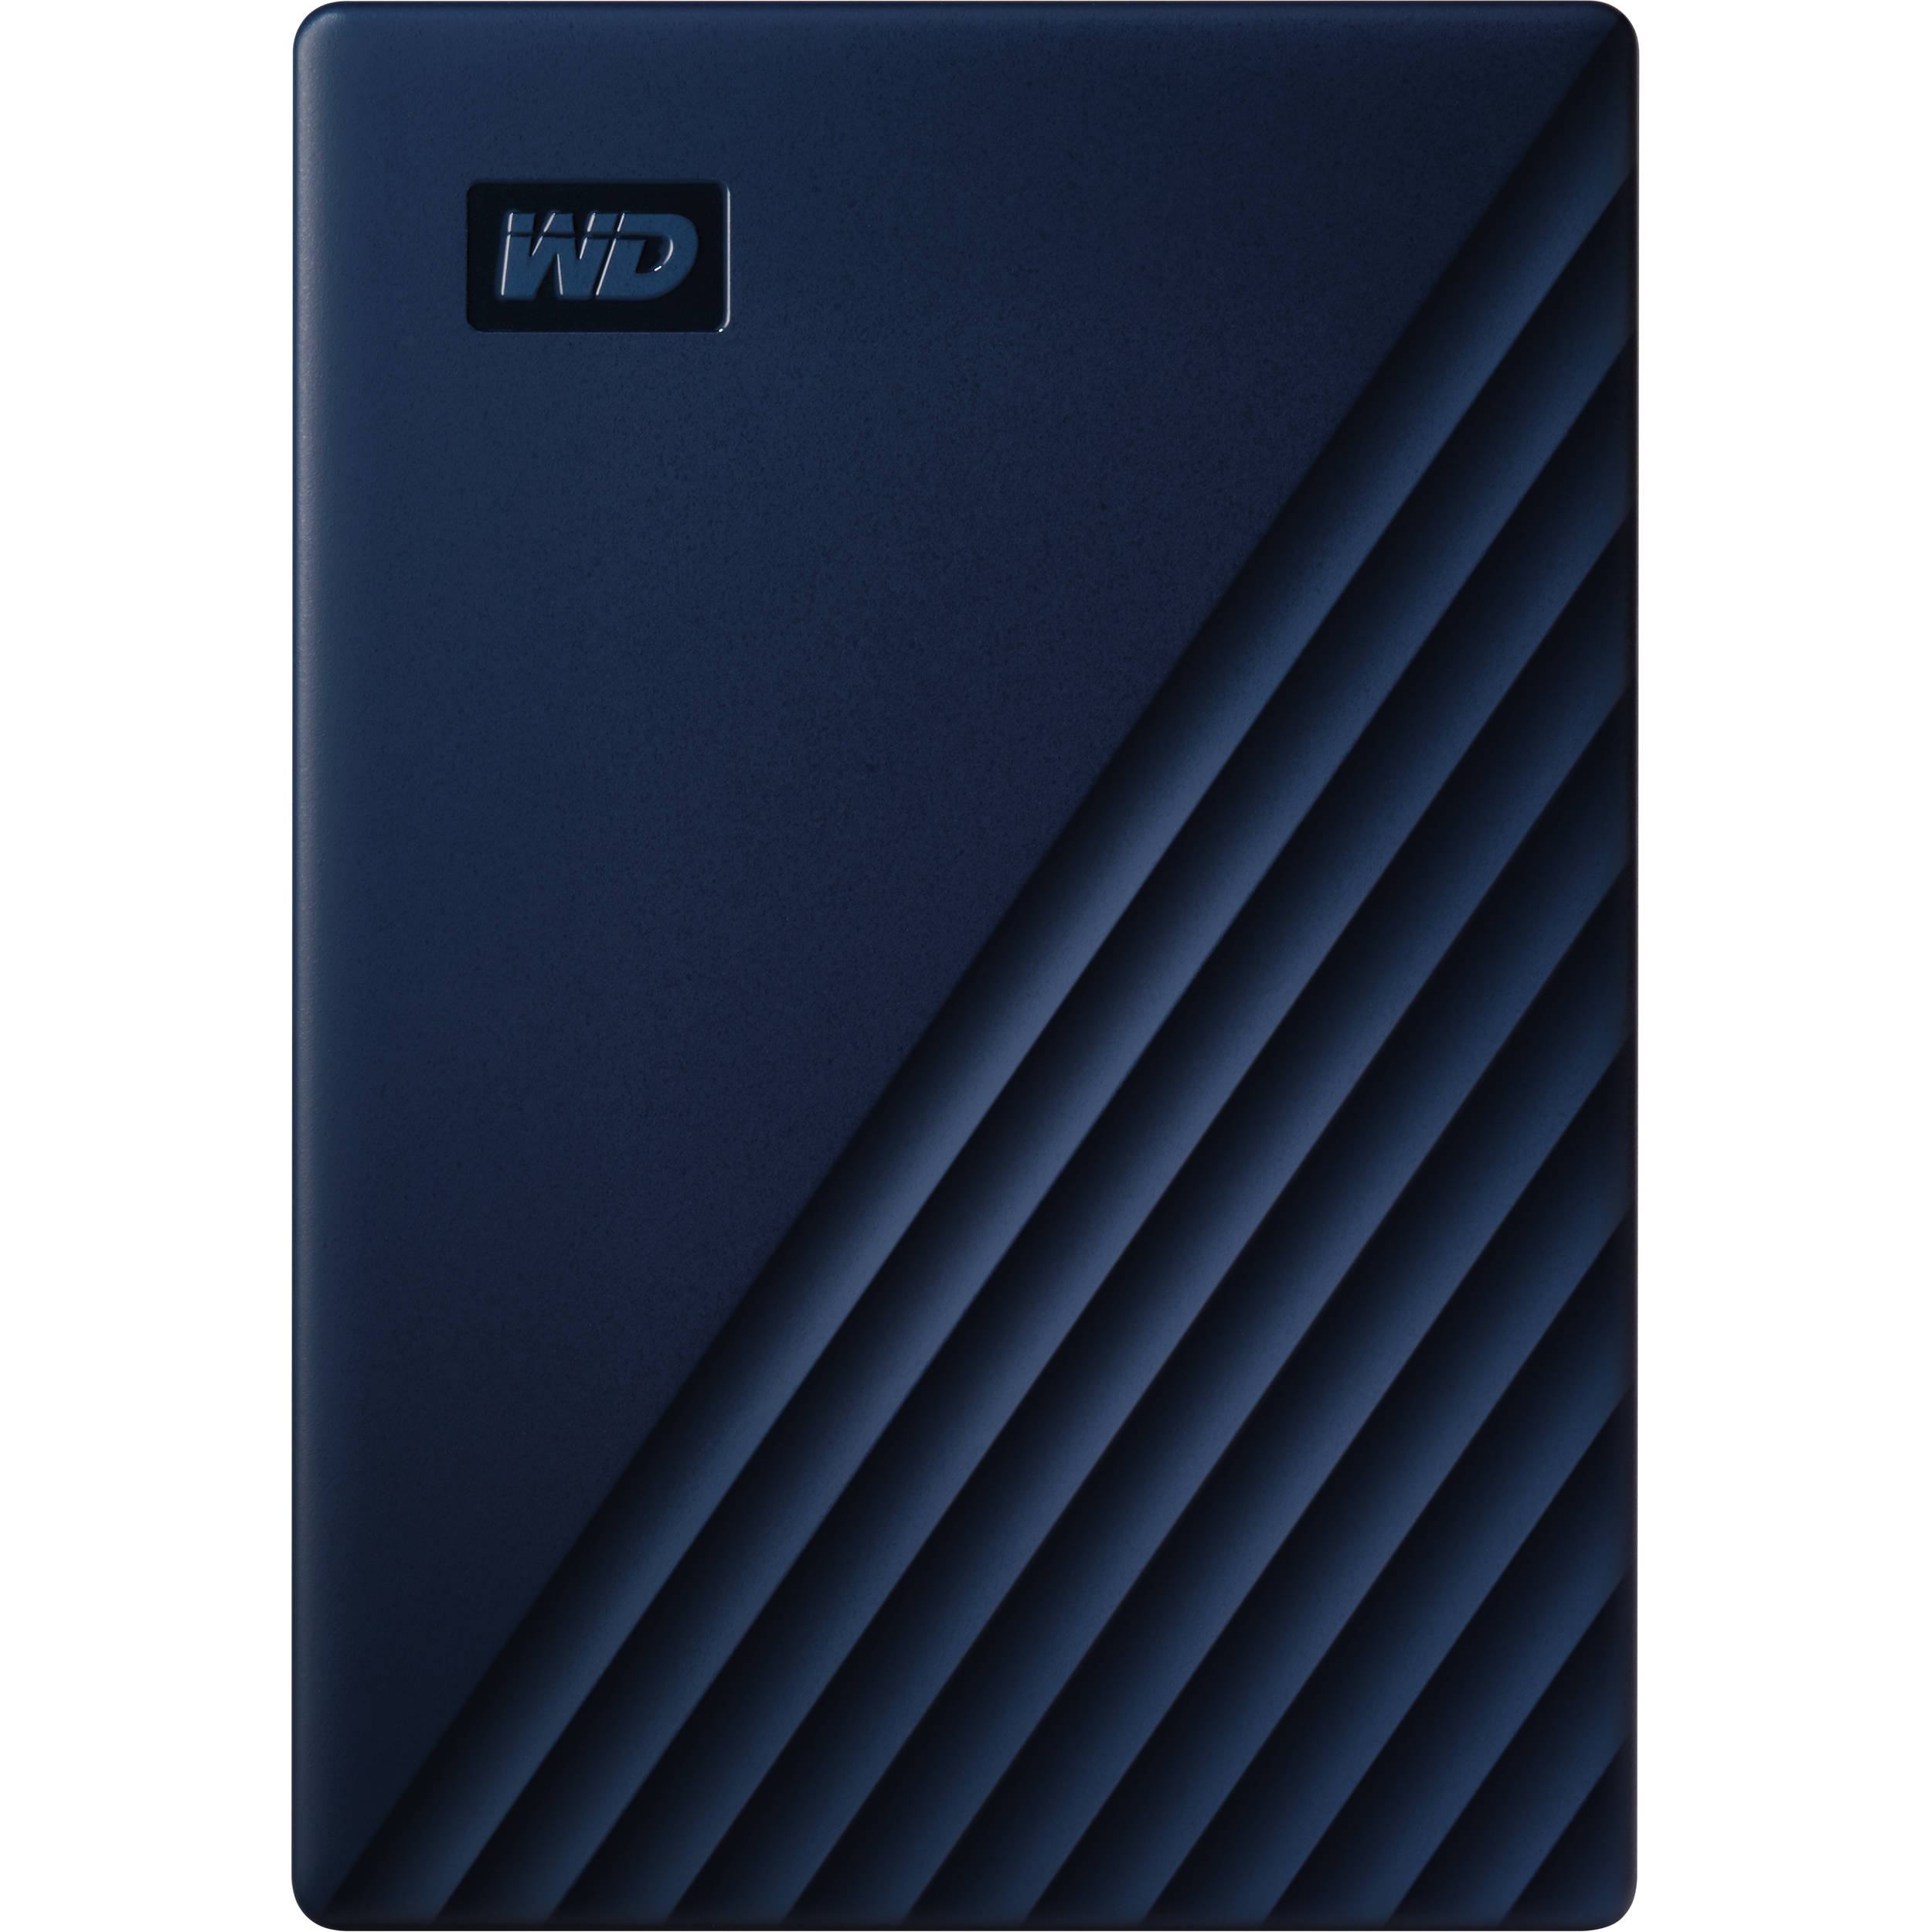 western digital passport ultra reformat for mac and pc 2015